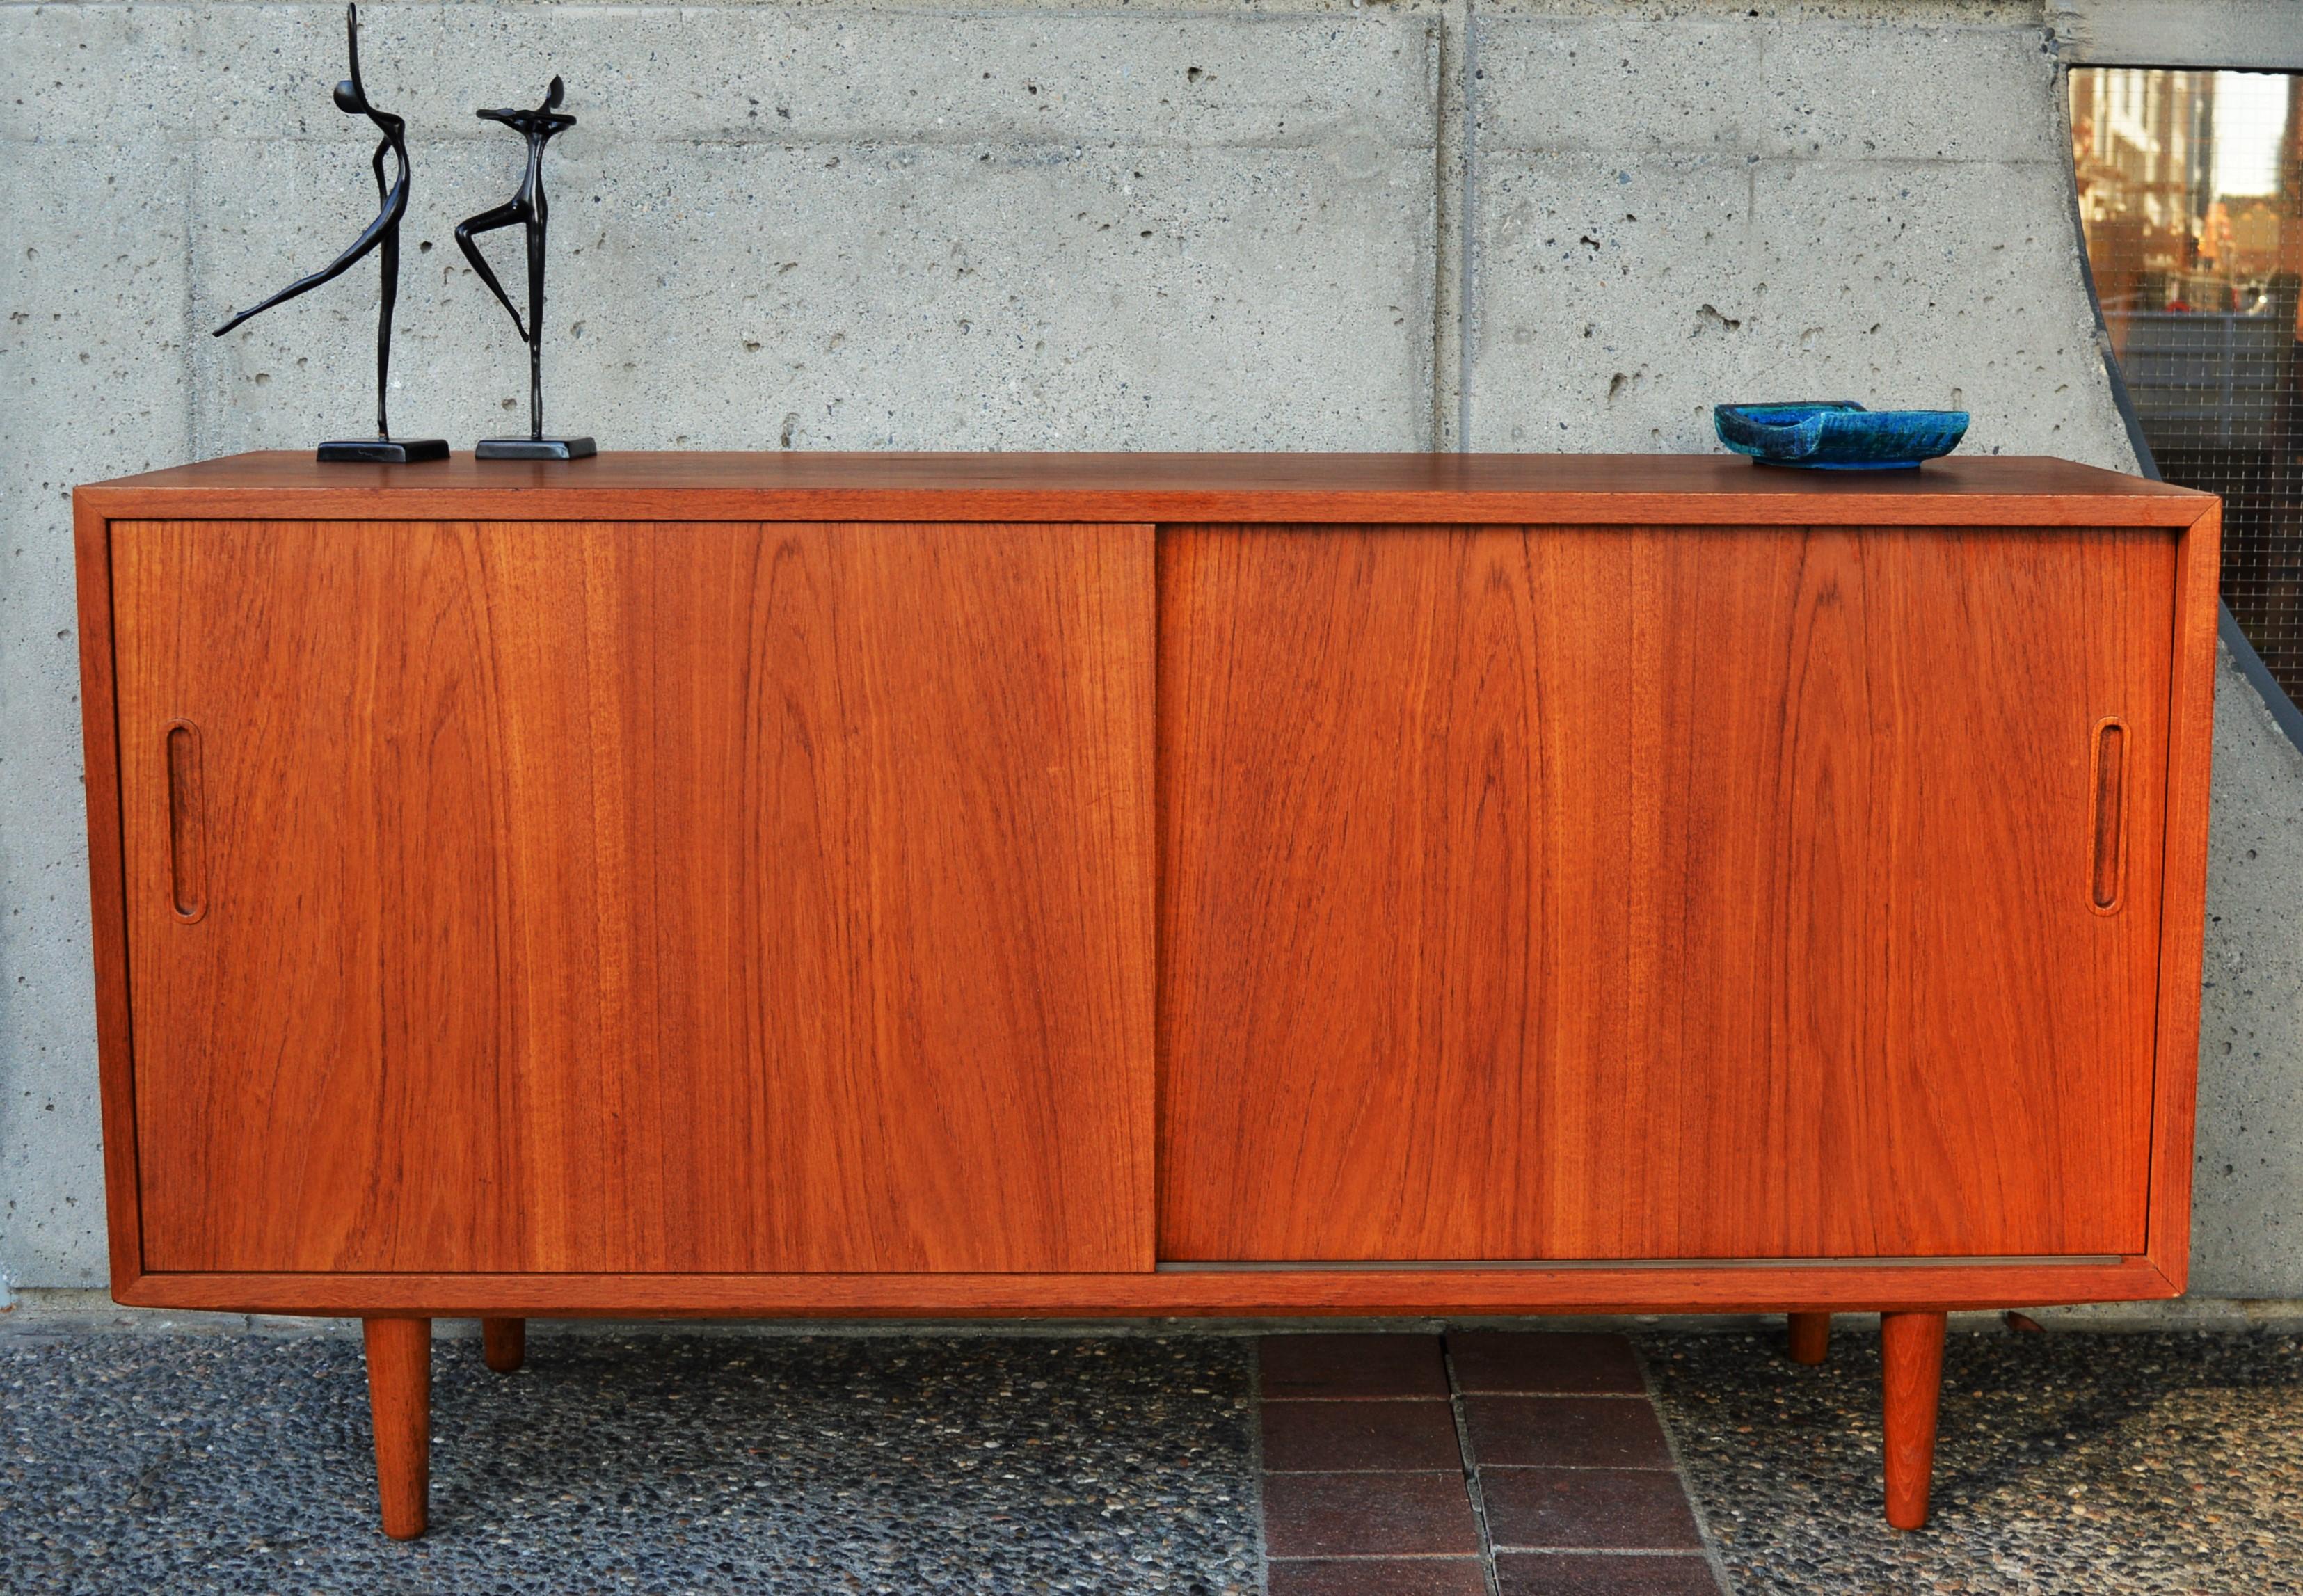 This hot Danish Modern teak compact buffet was designed by Hundevad & Co. in the 1960s and features gorgeous grain - check out those door fronts! - which open to reveal a beech interior with 3 adjustable shelves and one slim profile felted drawer. A